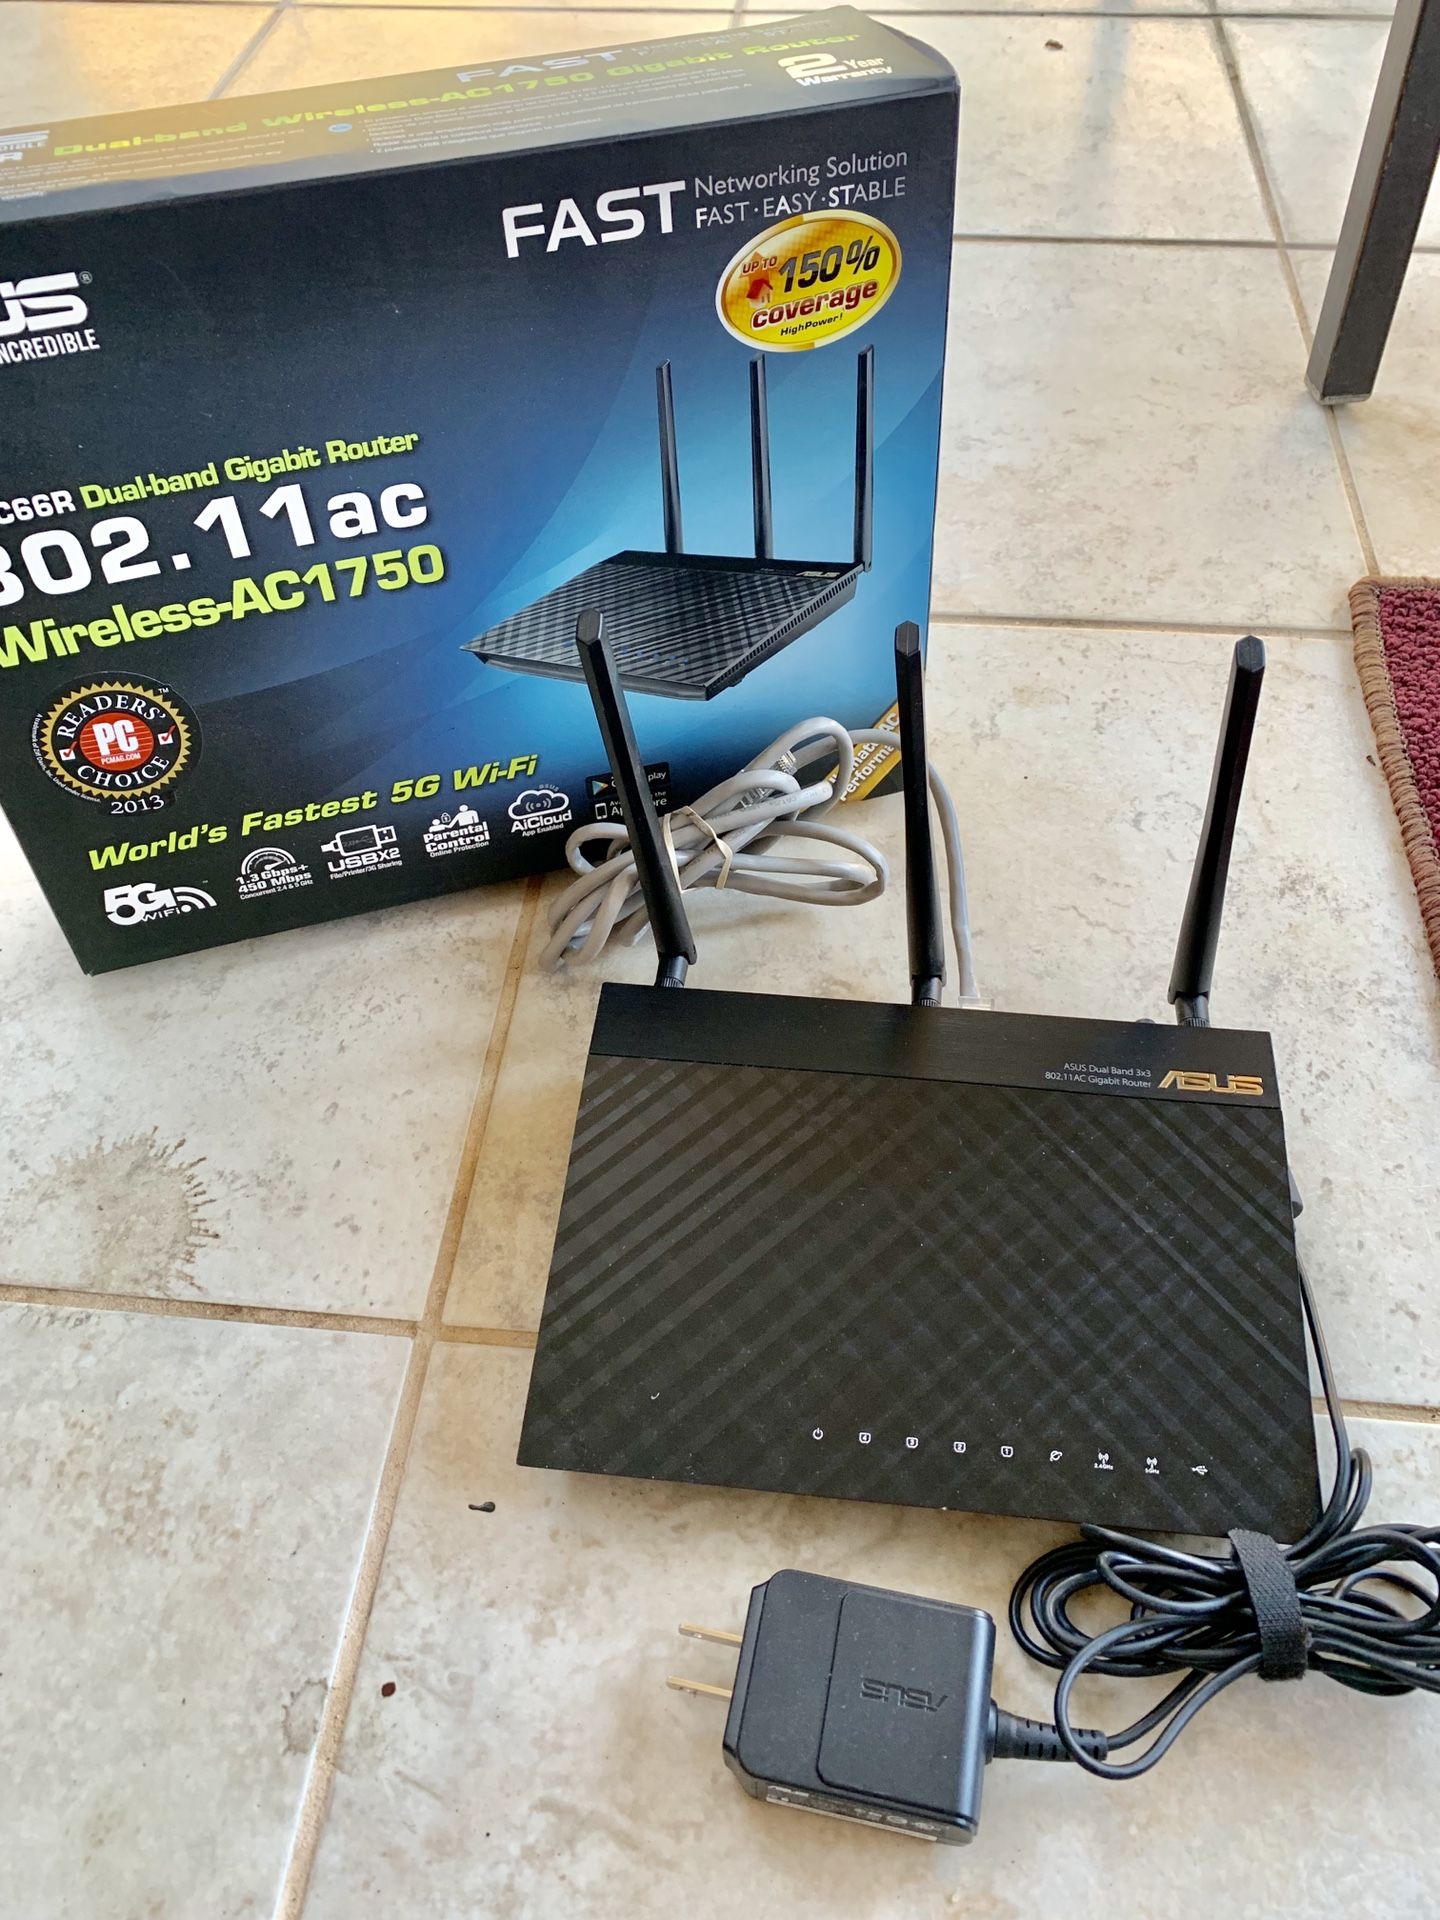 Asus Dual-band Gigabit Router Wireless AC1750